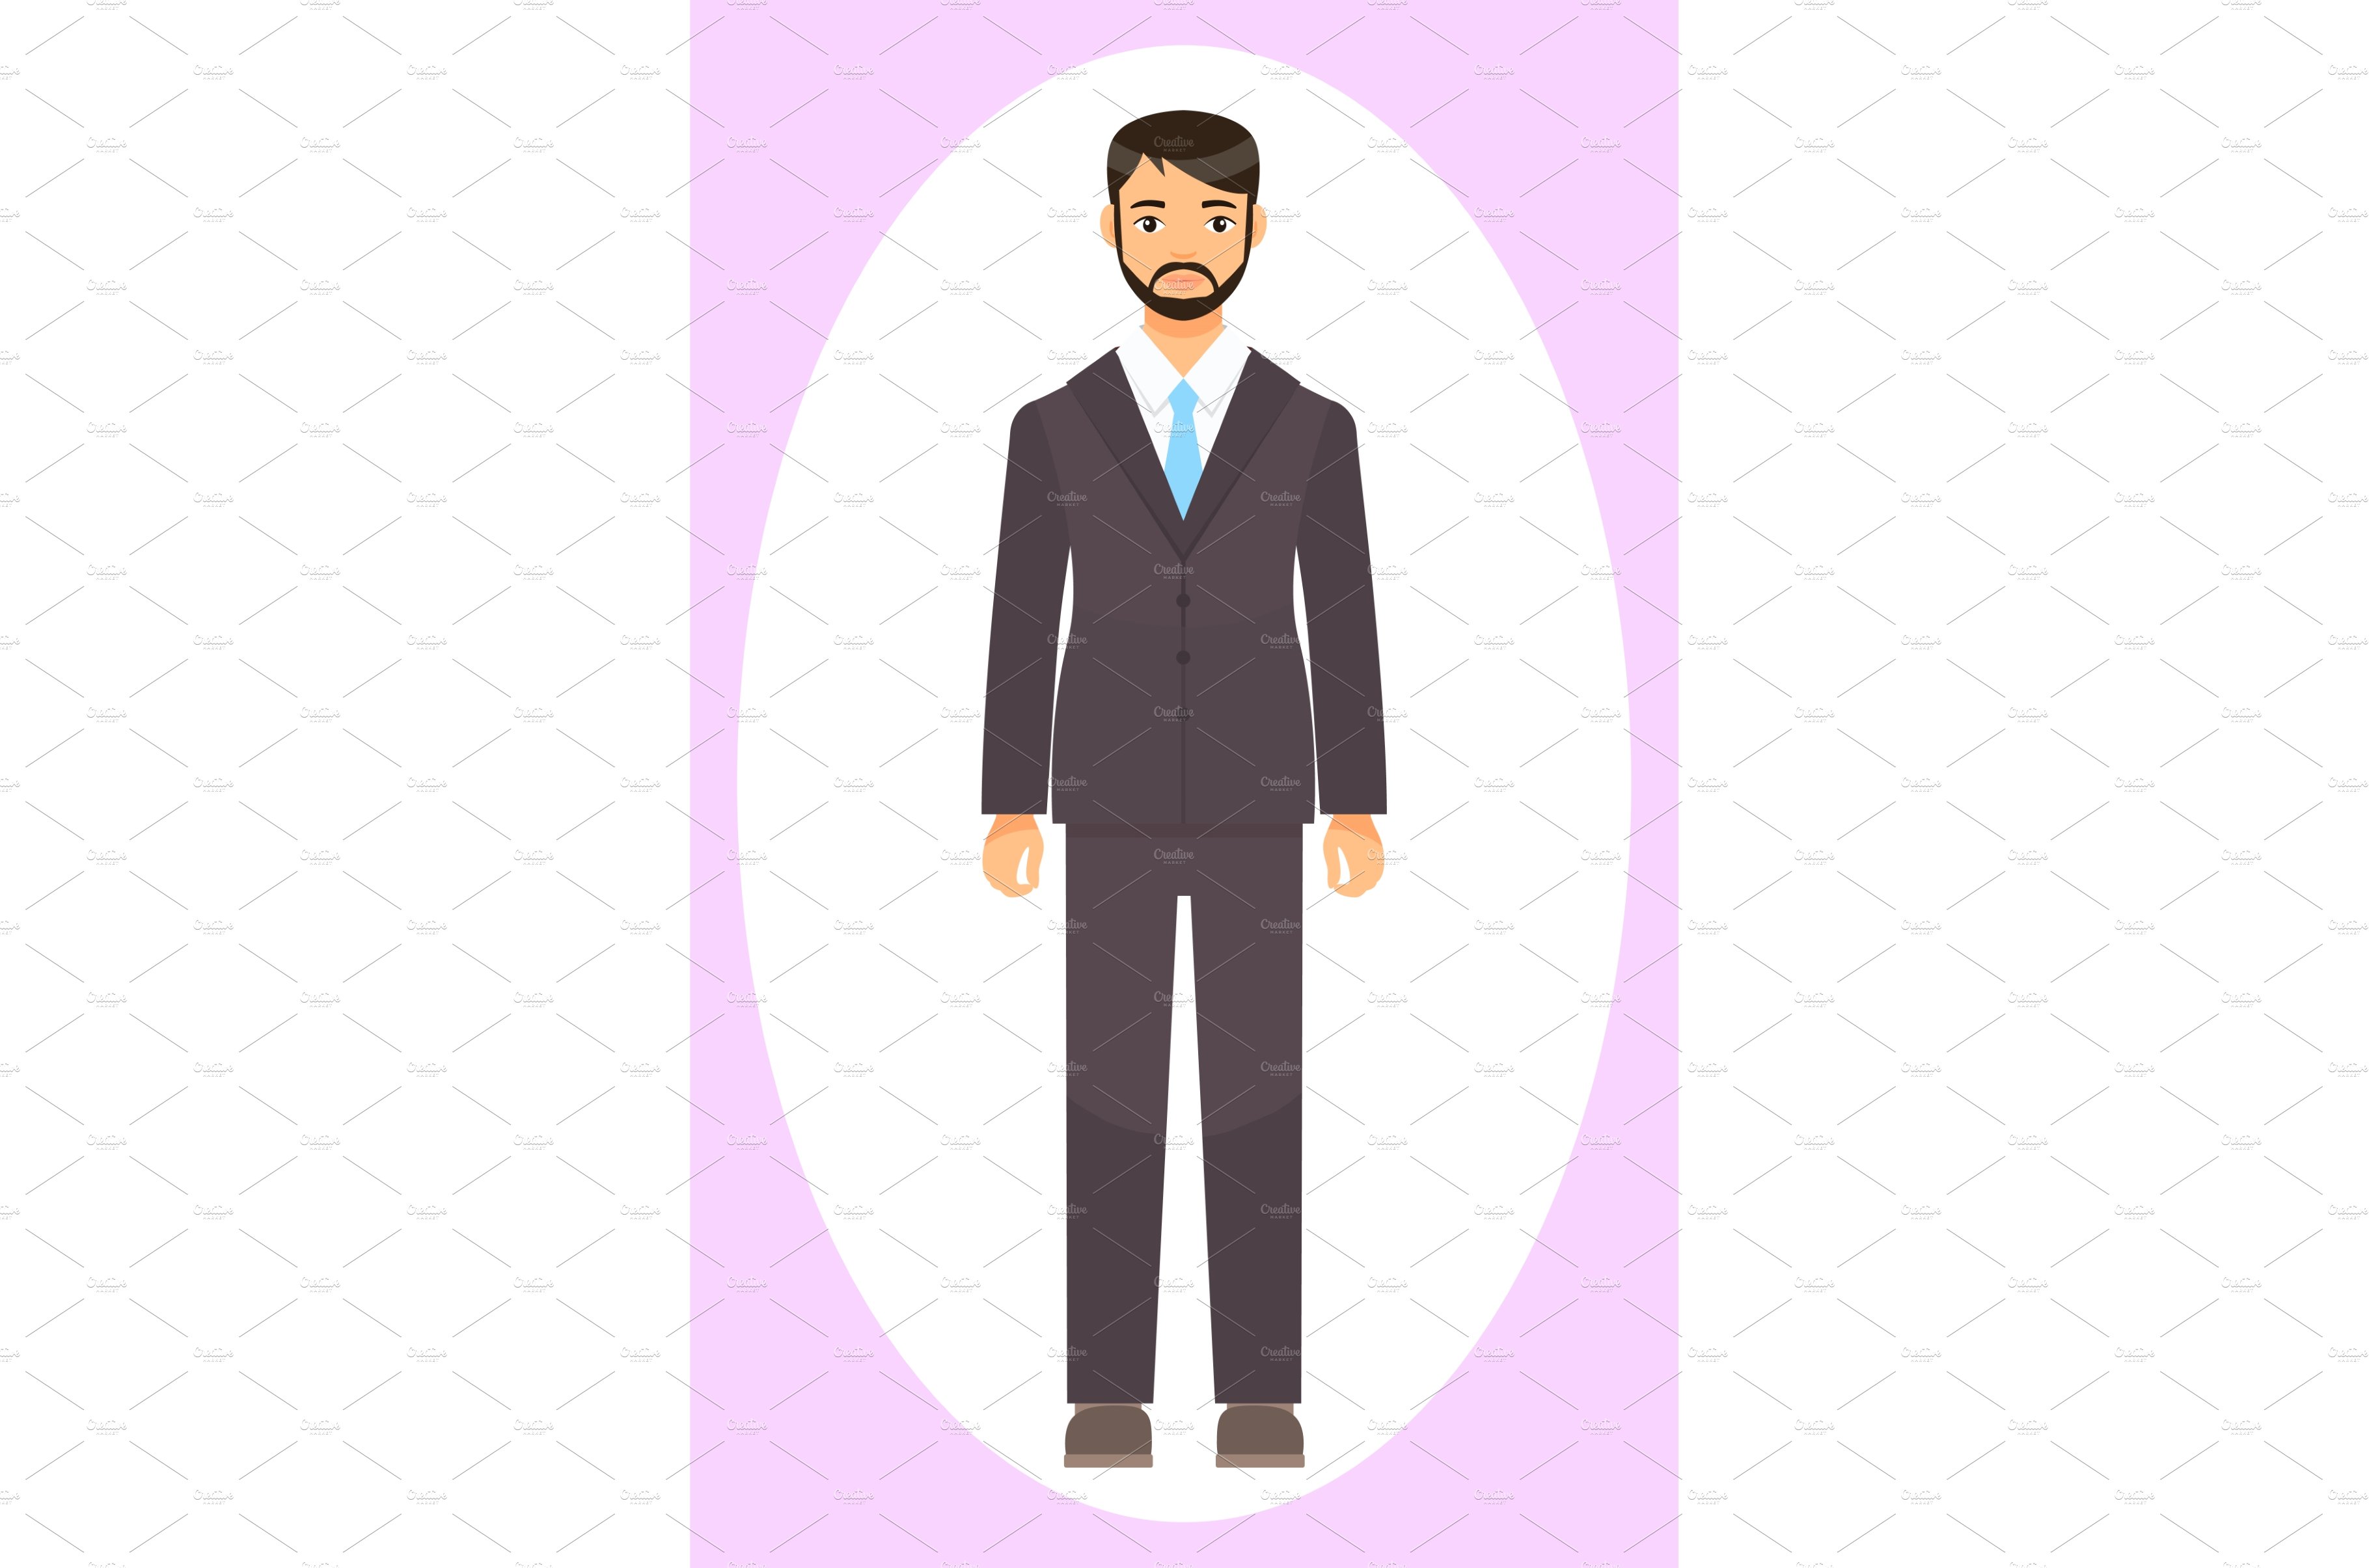 Dresscode of office worker, man in cover image.